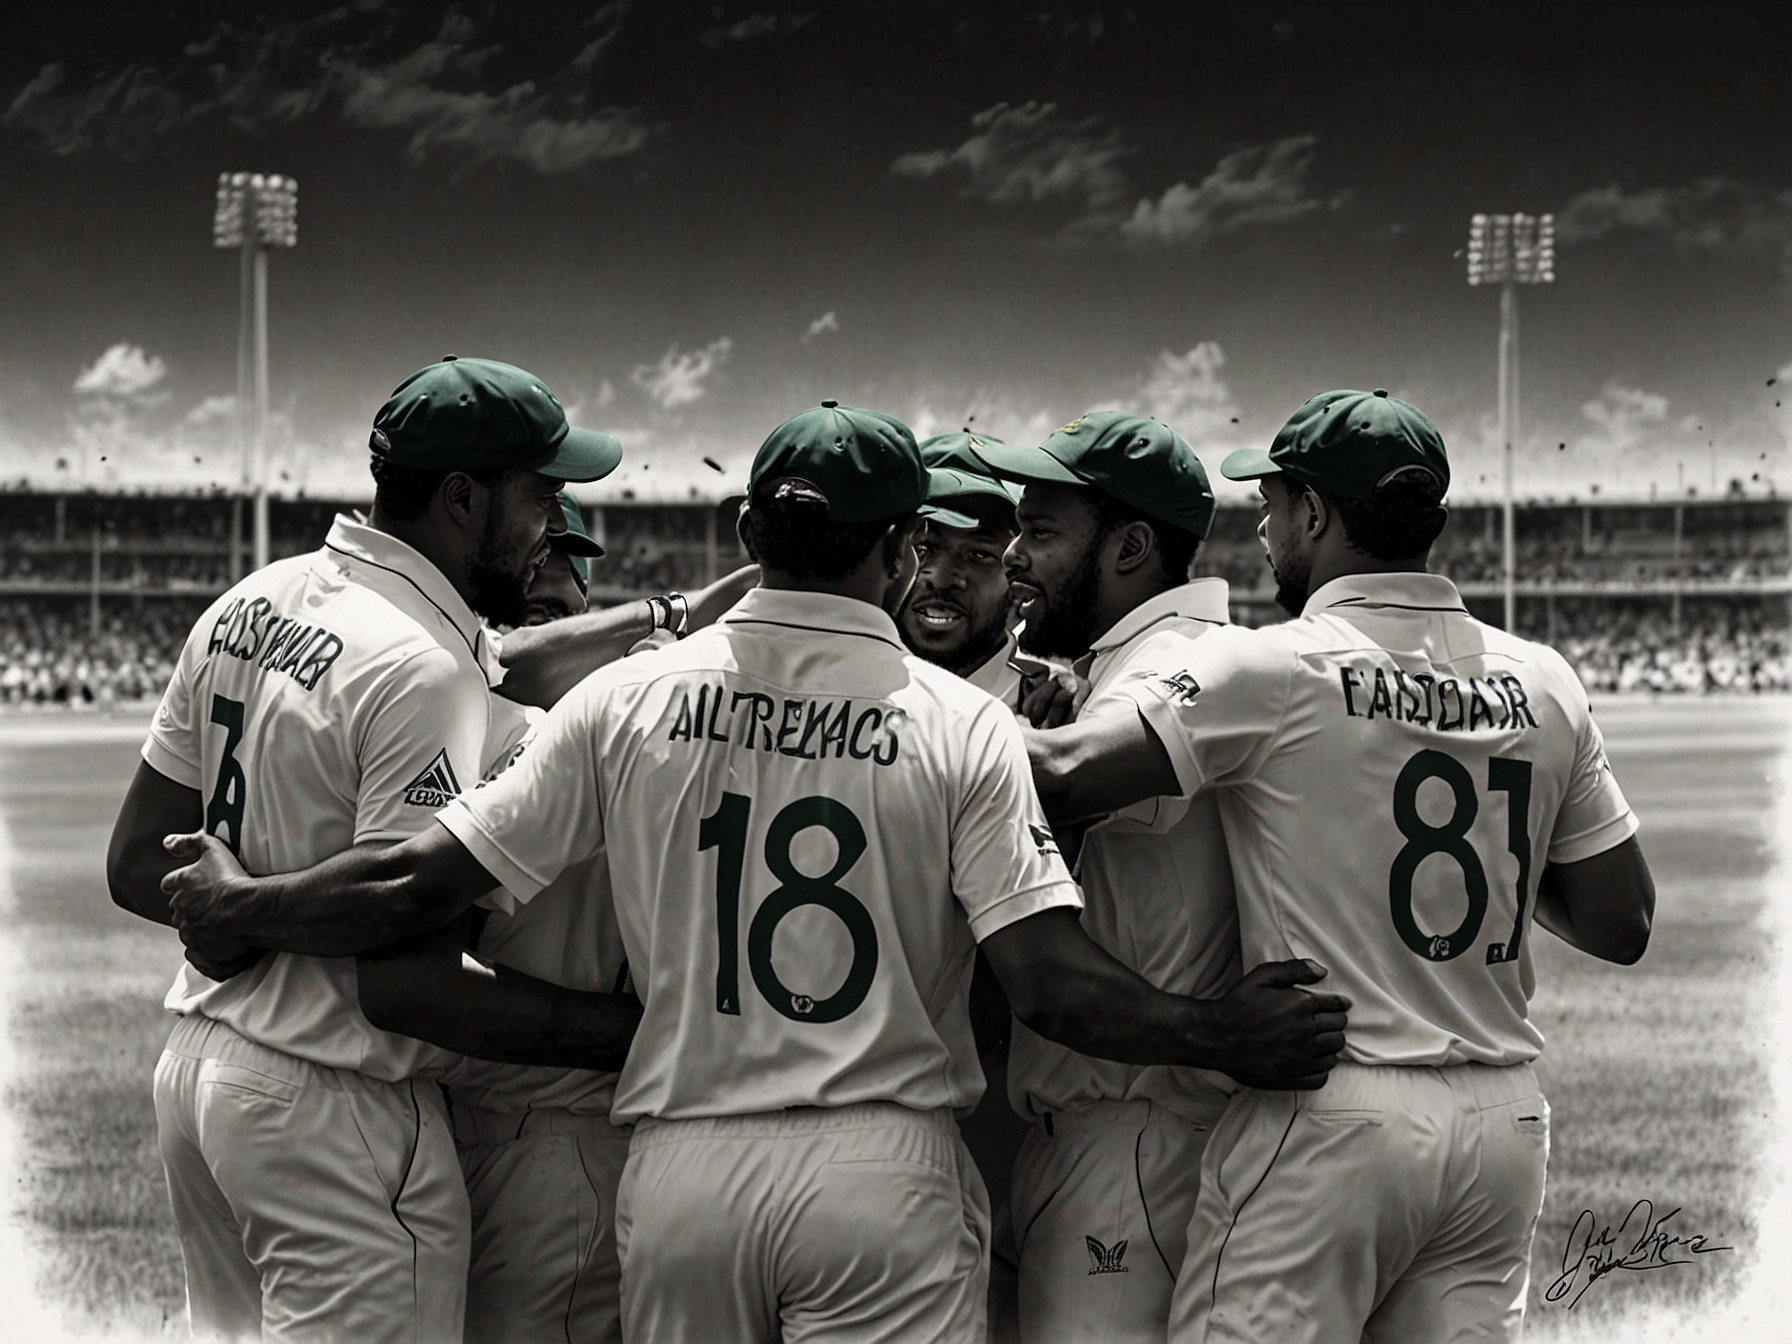 South African cricket team huddled together on the field, exuding camaraderie and unity, showcasing their collective spirit and determination throughout the gripping tournament.